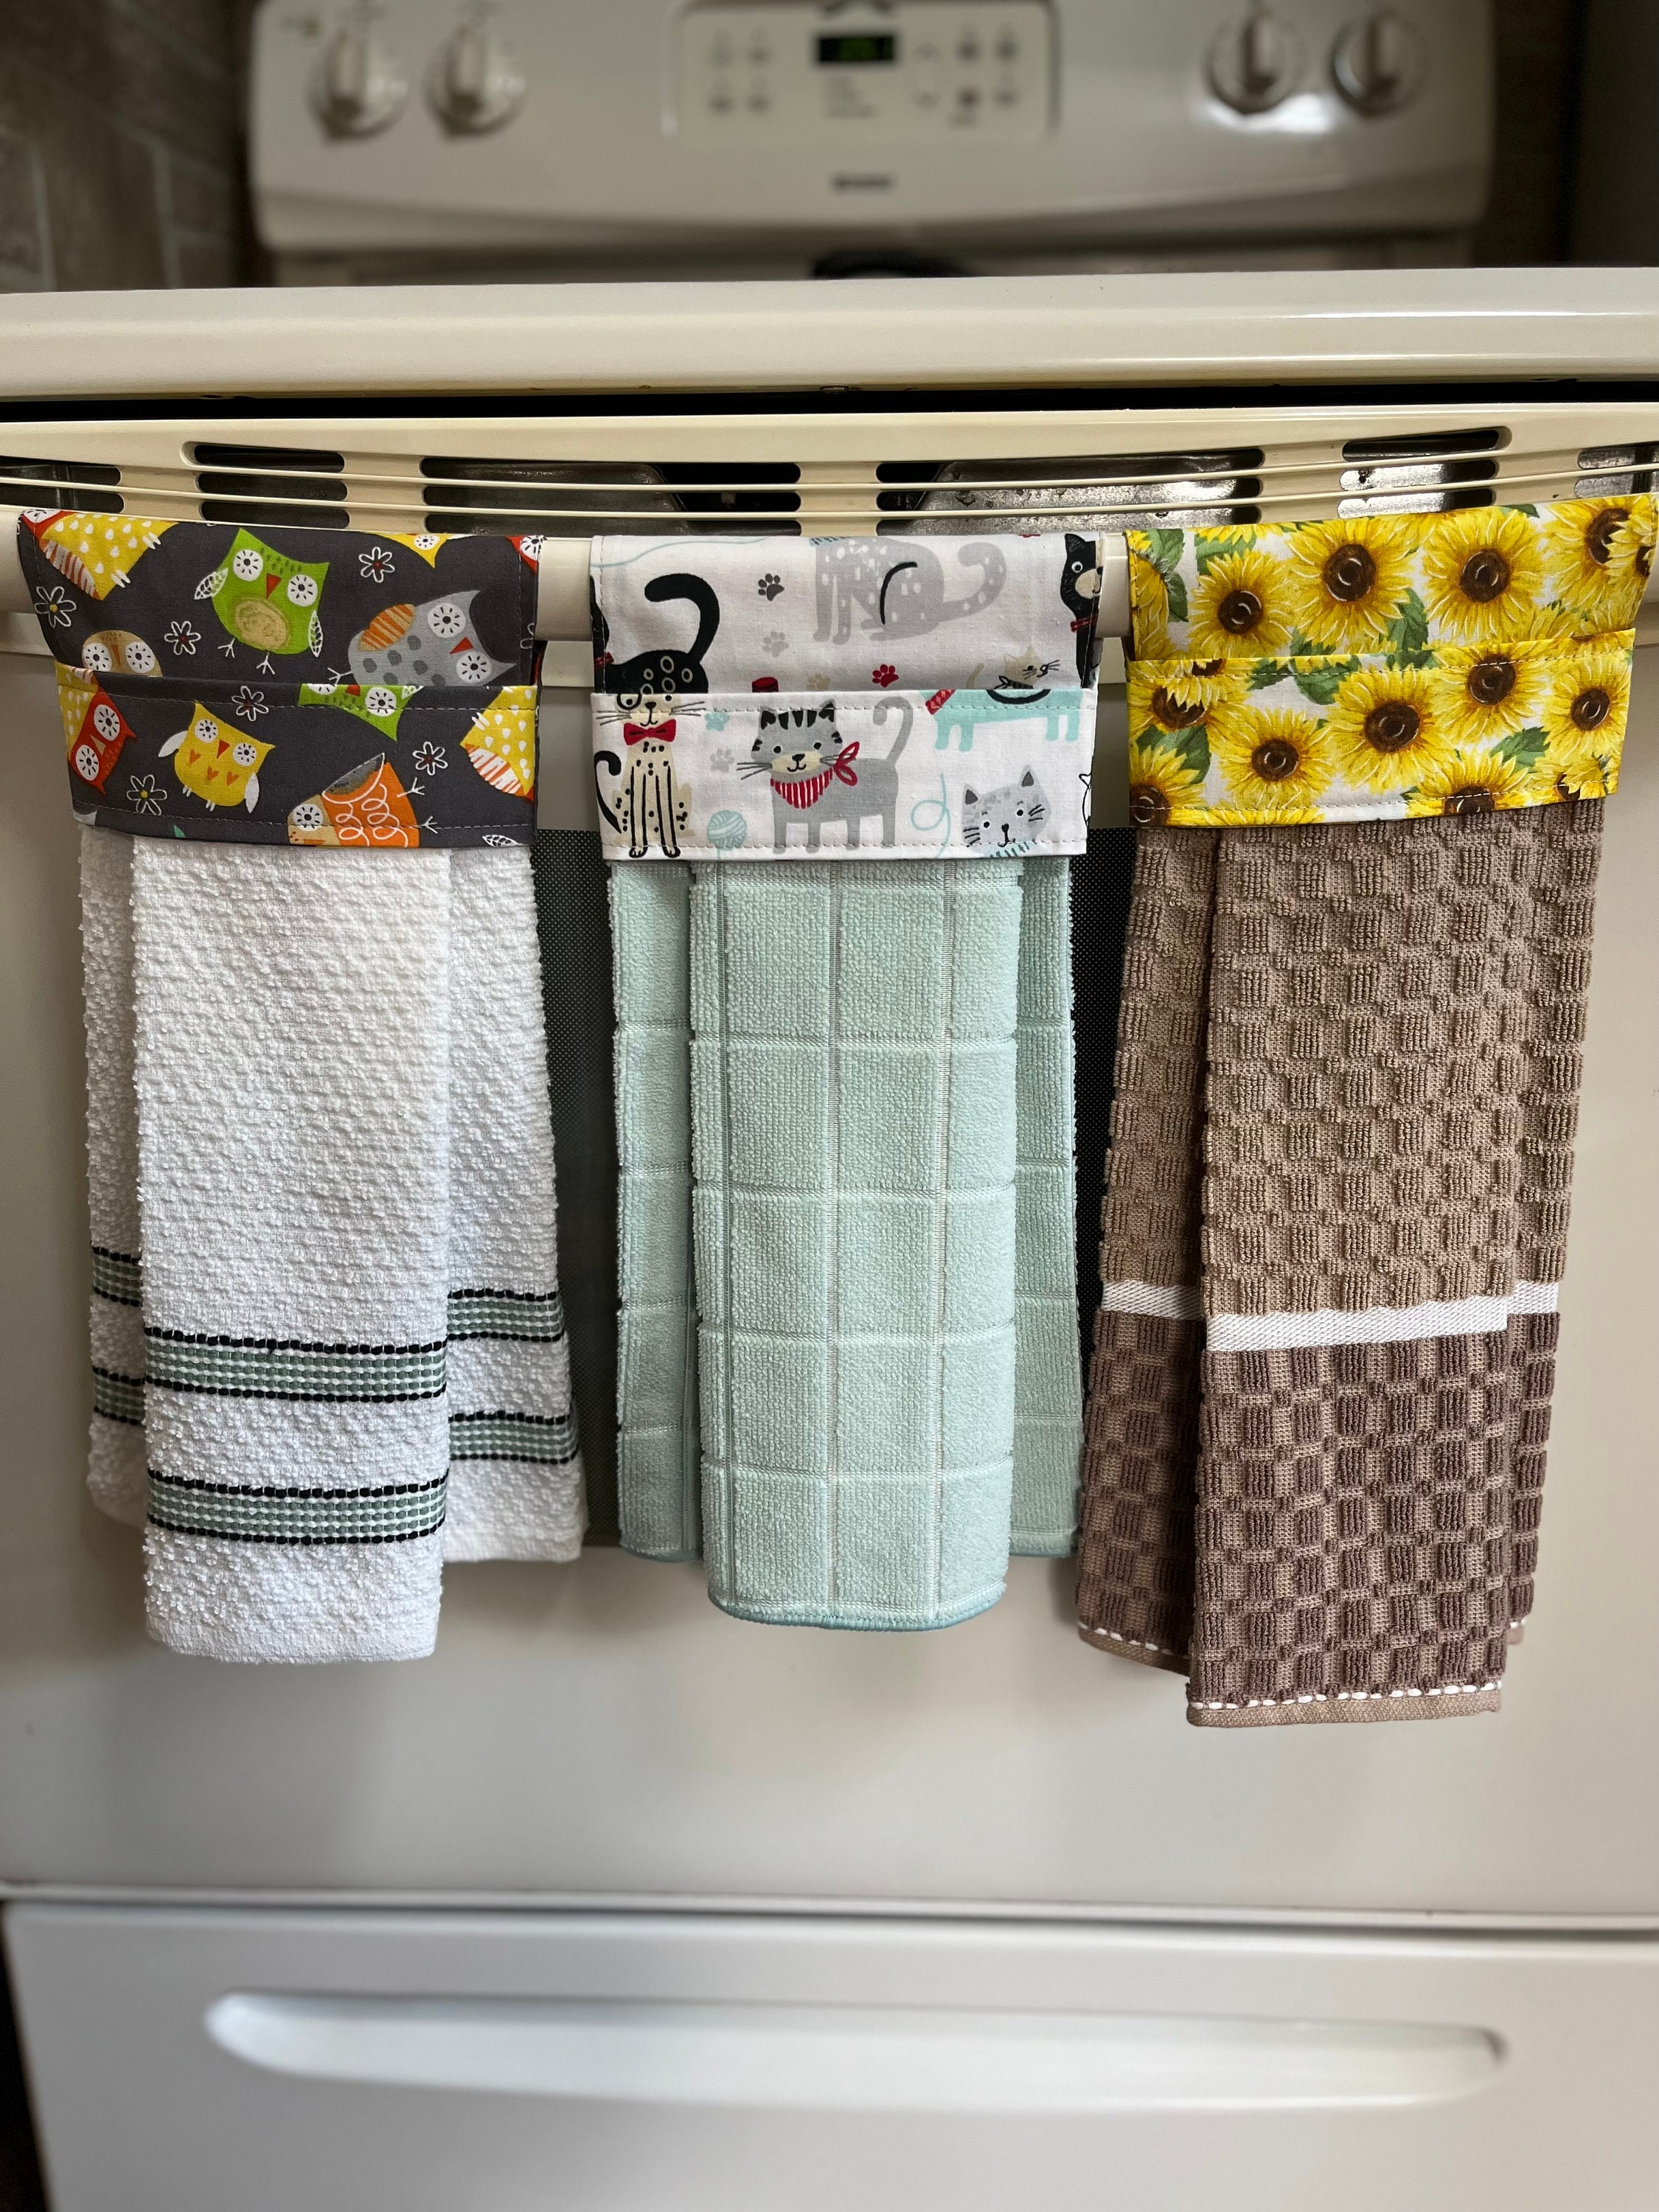  NOQL Coffee Kitchen Towels, Brown Hand Towels, Vintage Bathroom  Towels, Kitchen Theme Decor Sets, Coffee Decorations for Kitchen, Host and  Hostess Gifts, Set of 2, 16x24 : Home & Kitchen